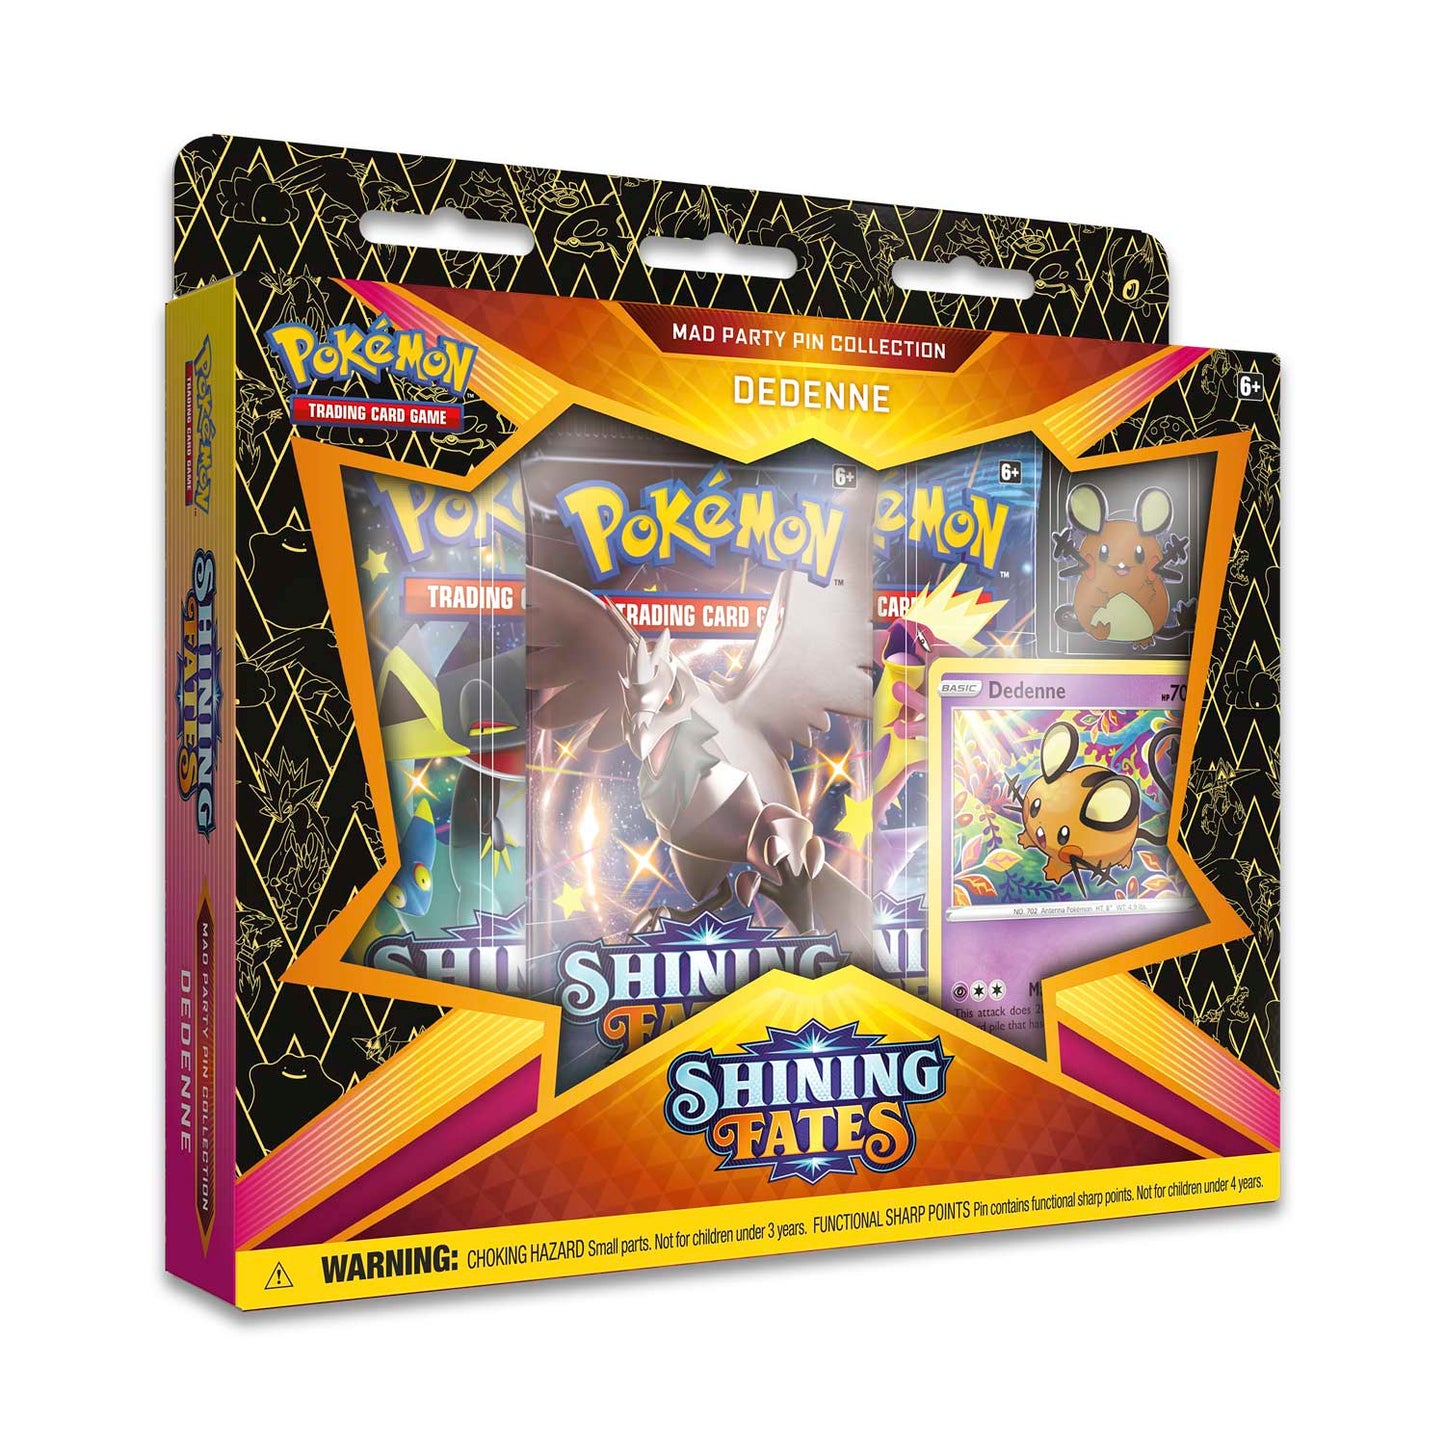 Pokémon TCG: Shining Fates Mad Party Pin Collection (Dedenne) Super Anime Store 